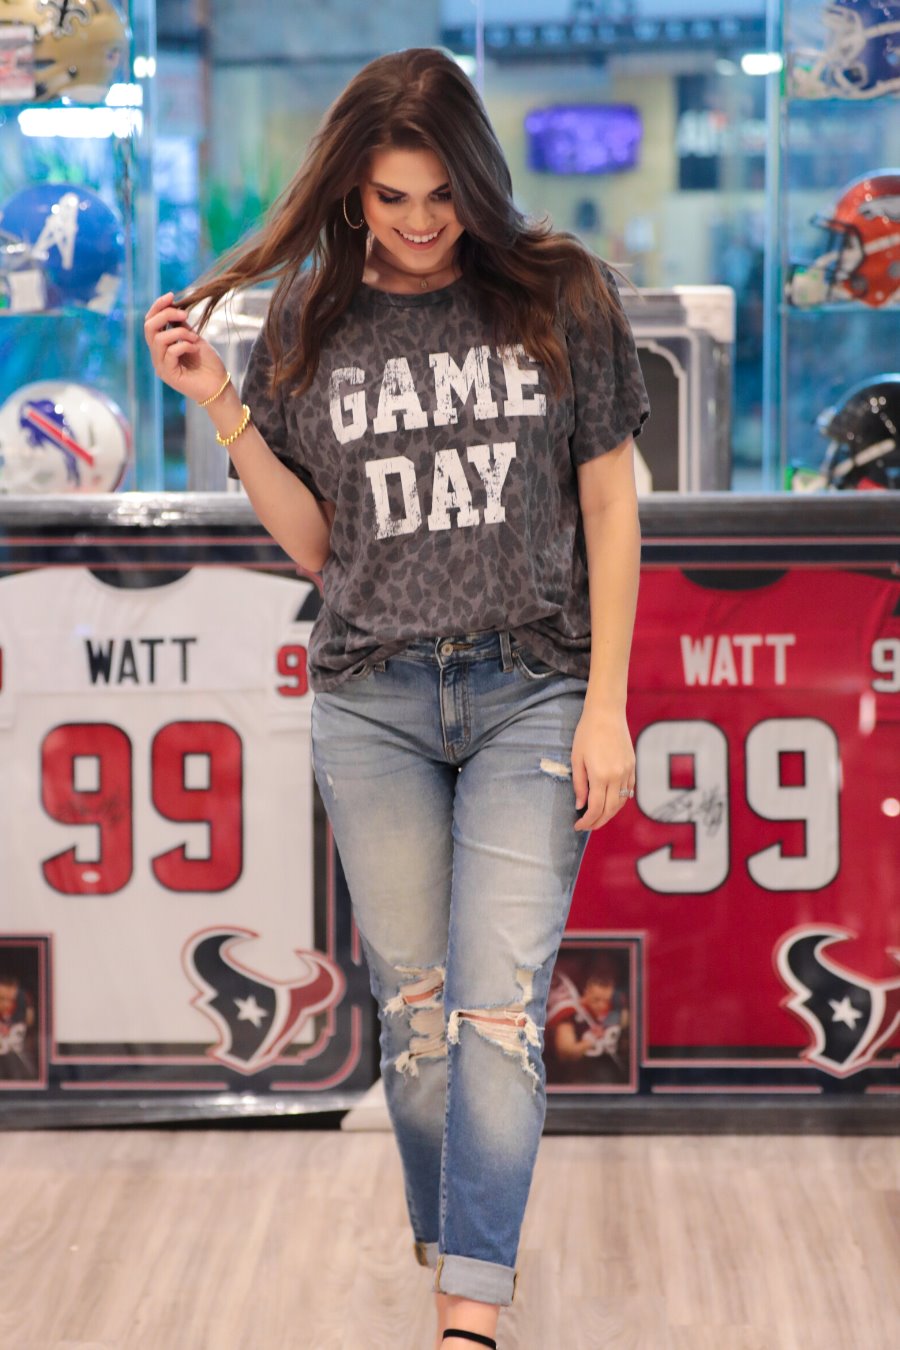 Game Day Leopard Graphic Tee